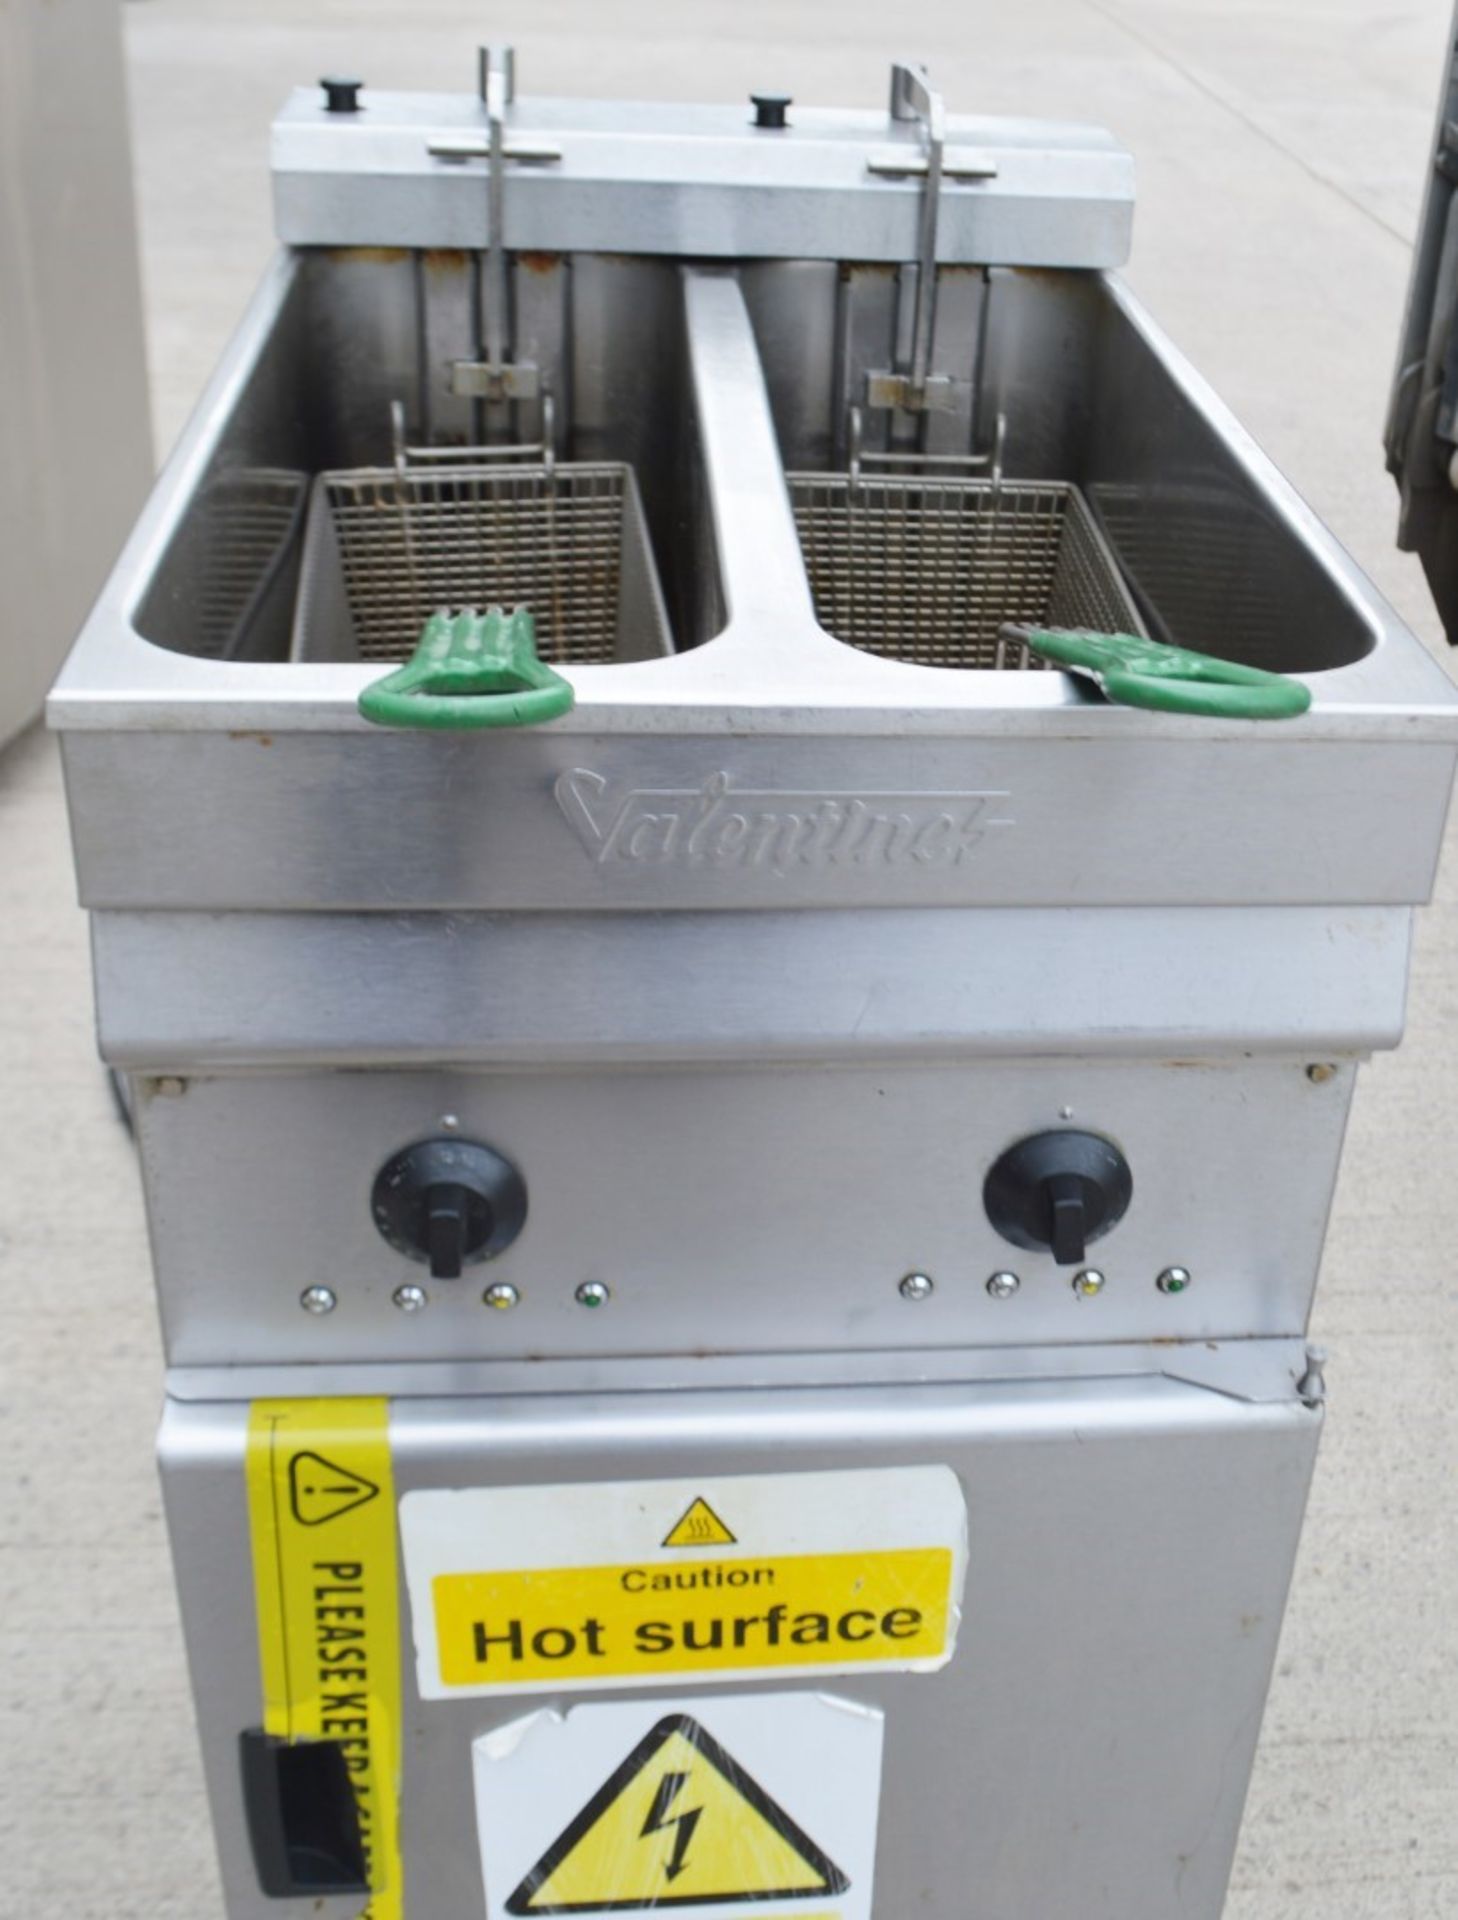 1 x Valentine 400mm Freestanding Electric Twin Basket Fryer With Stainless Steel Exterior and - Image 4 of 10